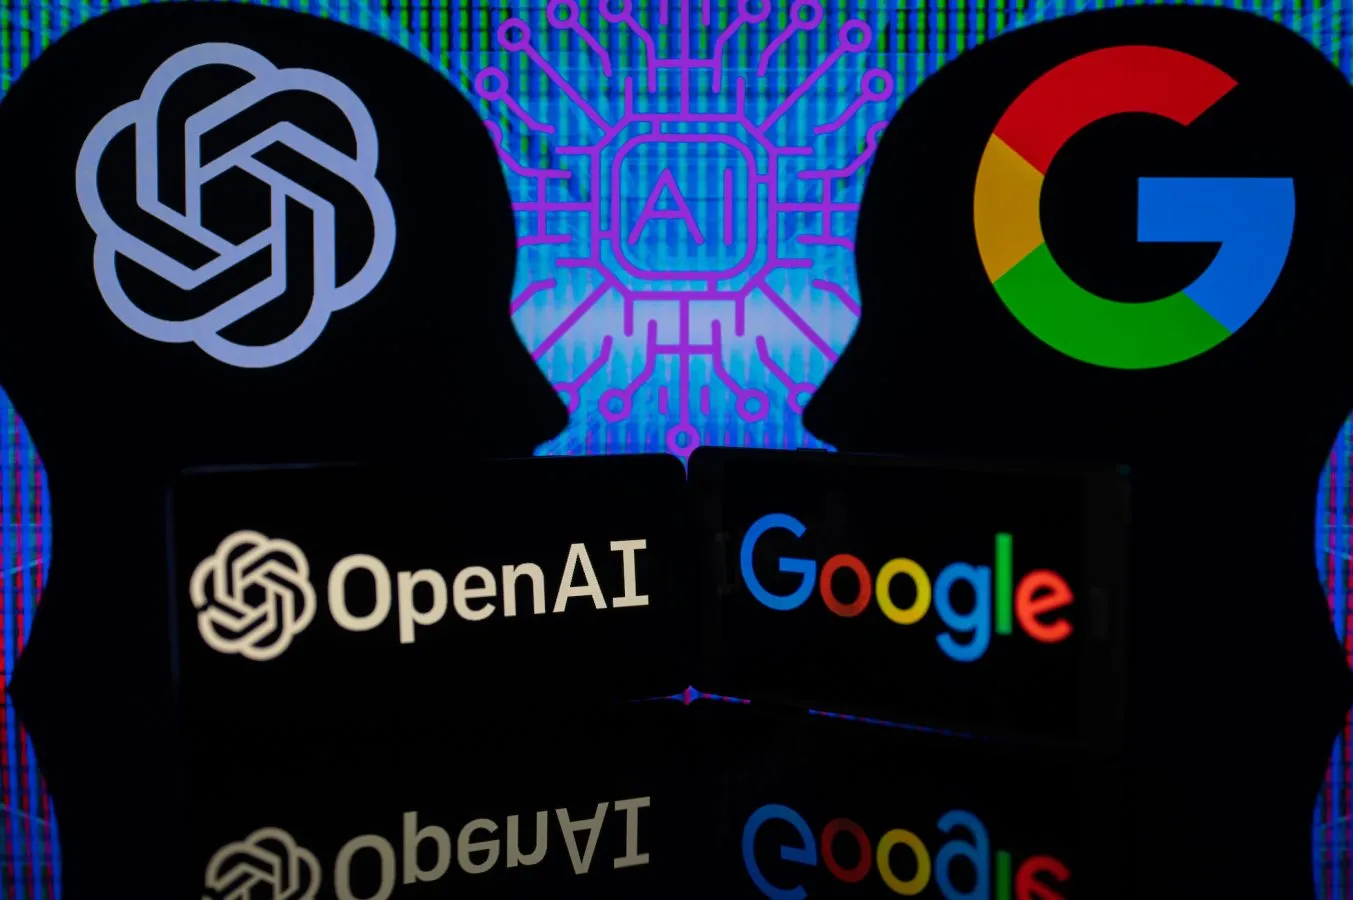 f-google-bard-vs-openai-chatgpt-chatbot-which-is-better-artificial-intelligence-ai-1353×900-75041676655979098